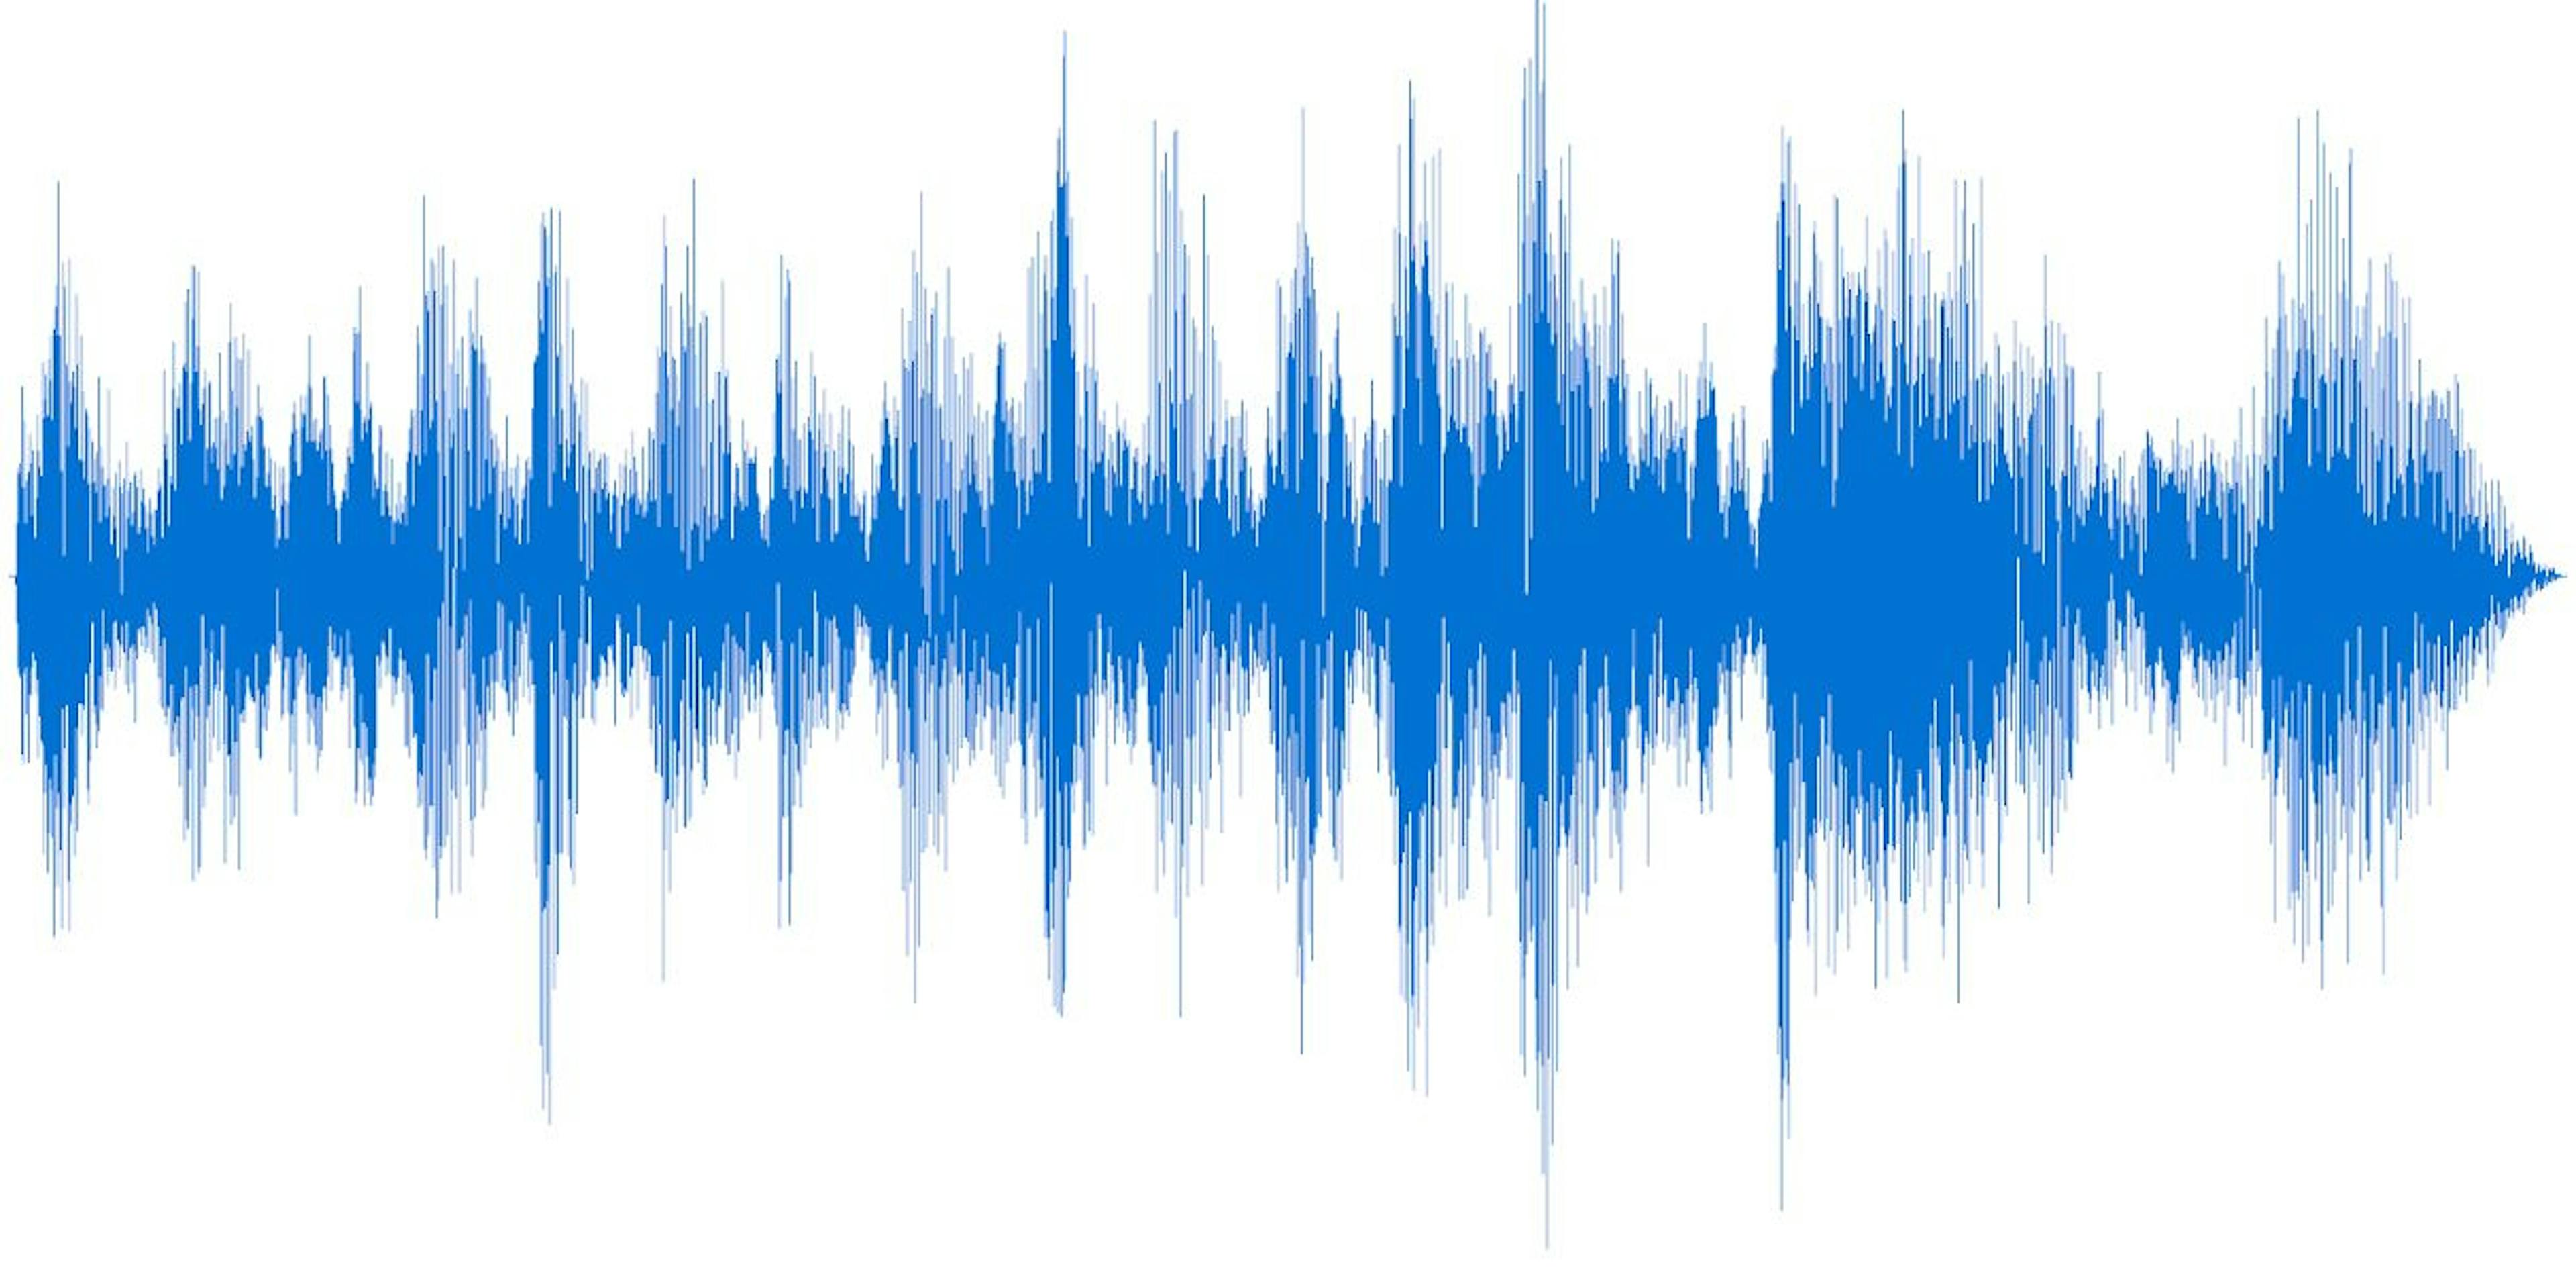 Example of a waveform